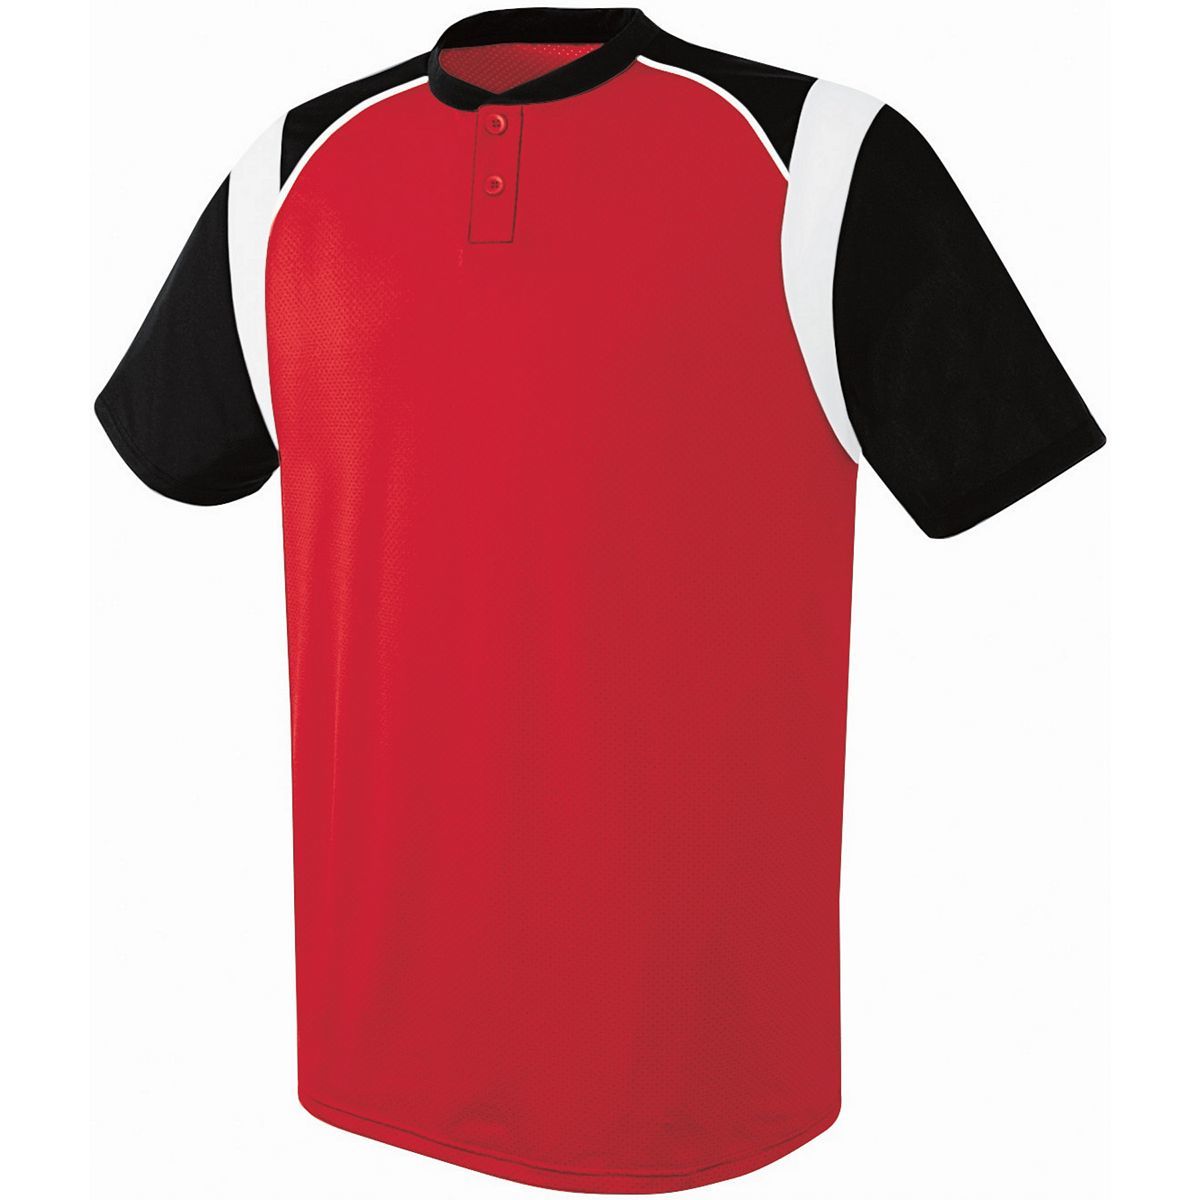 Augusta Sportswear Youth Wildcard Two-Button Jersey in Scarlet/Black/White  -Part of the Youth, Youth-Jersey, Augusta-Products, Baseball, Shirts, All-Sports, All-Sports-1 product lines at KanaleyCreations.com